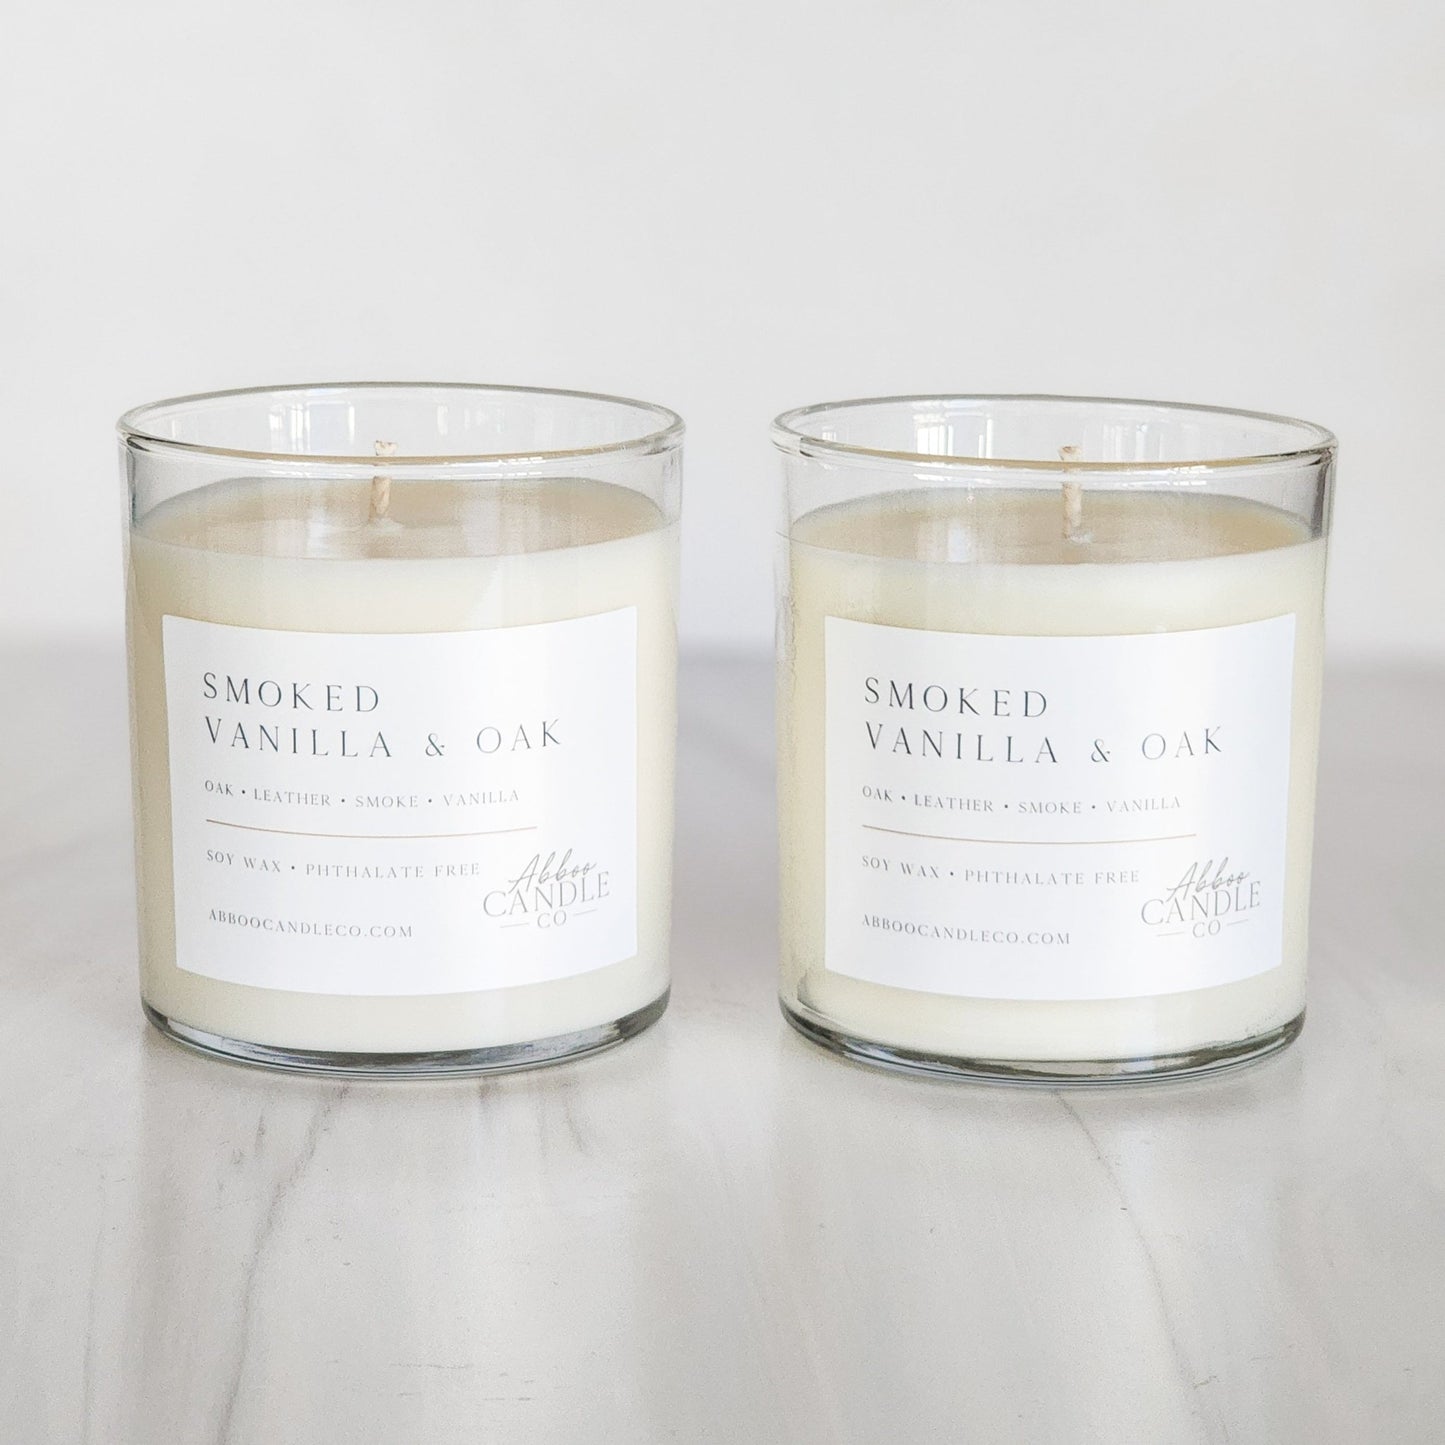 Smoked Vanilla and Oak Soy Candle Bundle - Abboo Candle Co